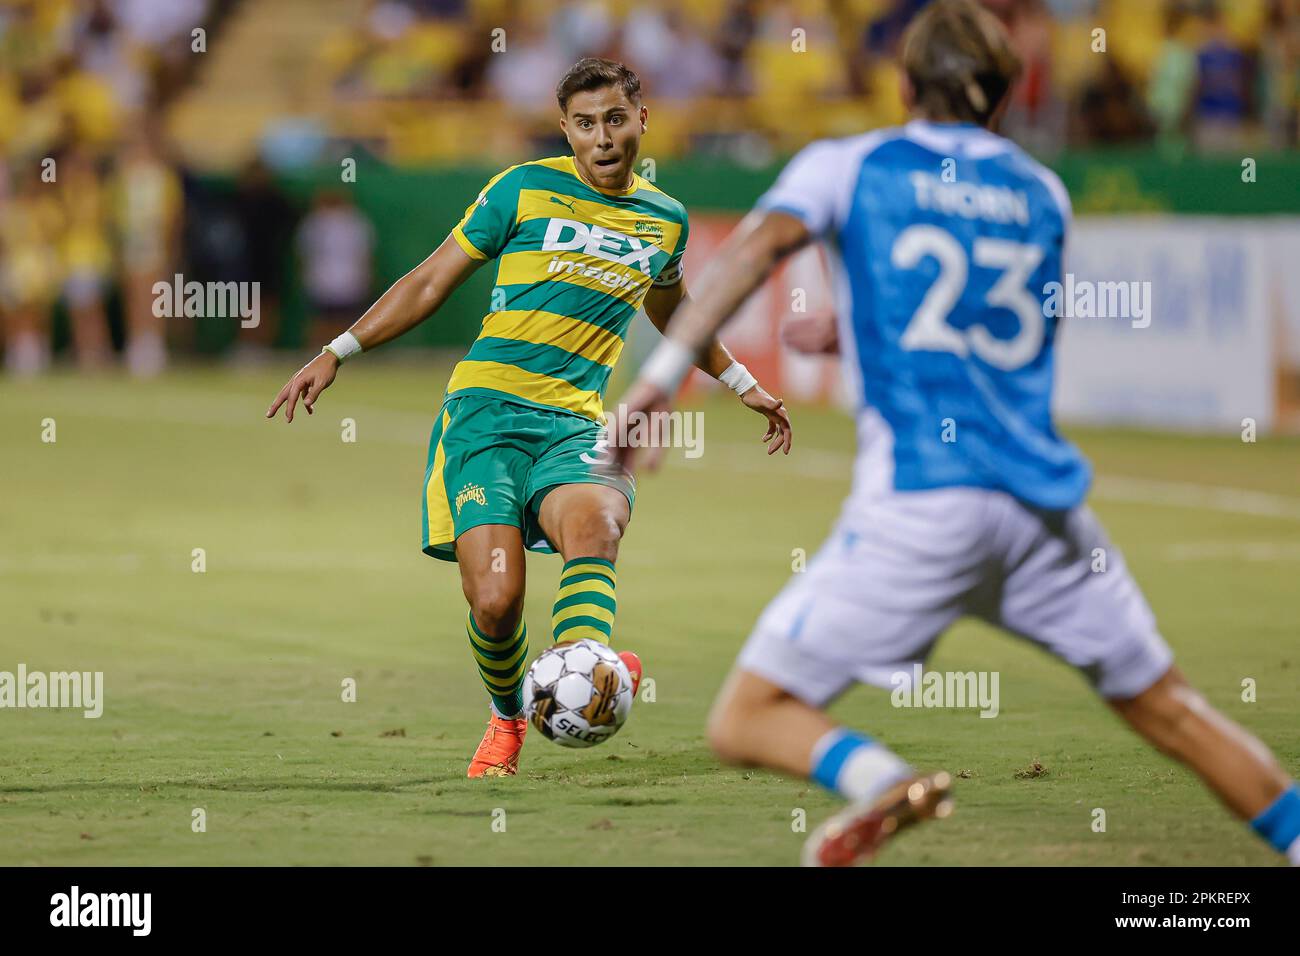 St. Petersburg, United States. 08th Apr, 2022. St. Petersburg, FL: Tampa  Bay Rowdies defender Aaron Guillen (33) goes up for a header during a USL  soccer game against Miami FC, Saturday, April